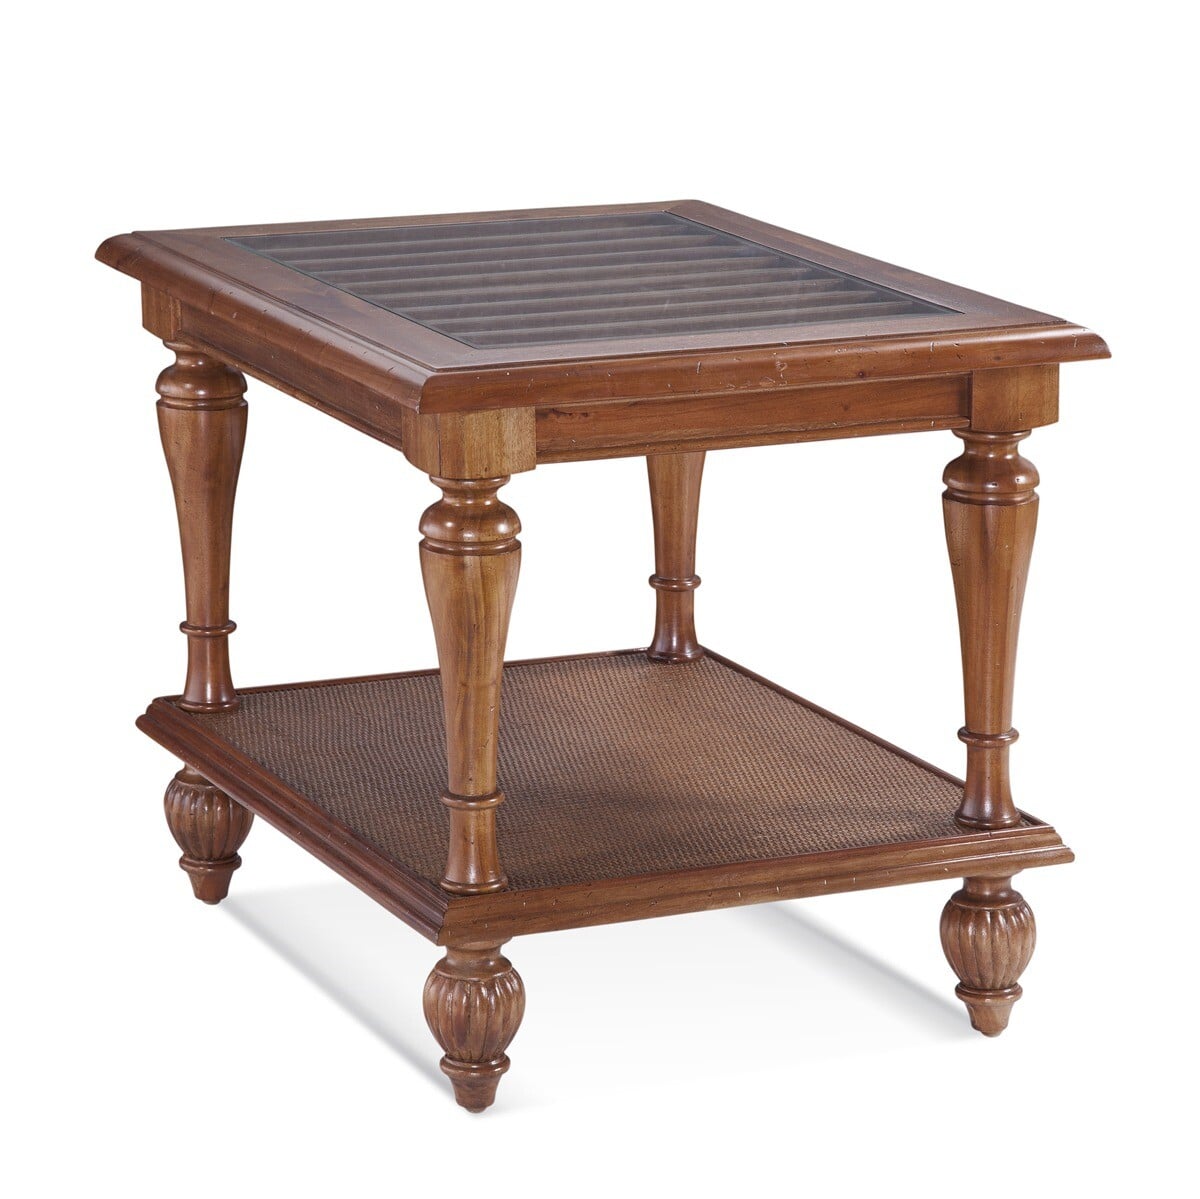 Grand View Solid Wood and Wicker End Table with Glass Top Model 934-071 by Braxton Culler